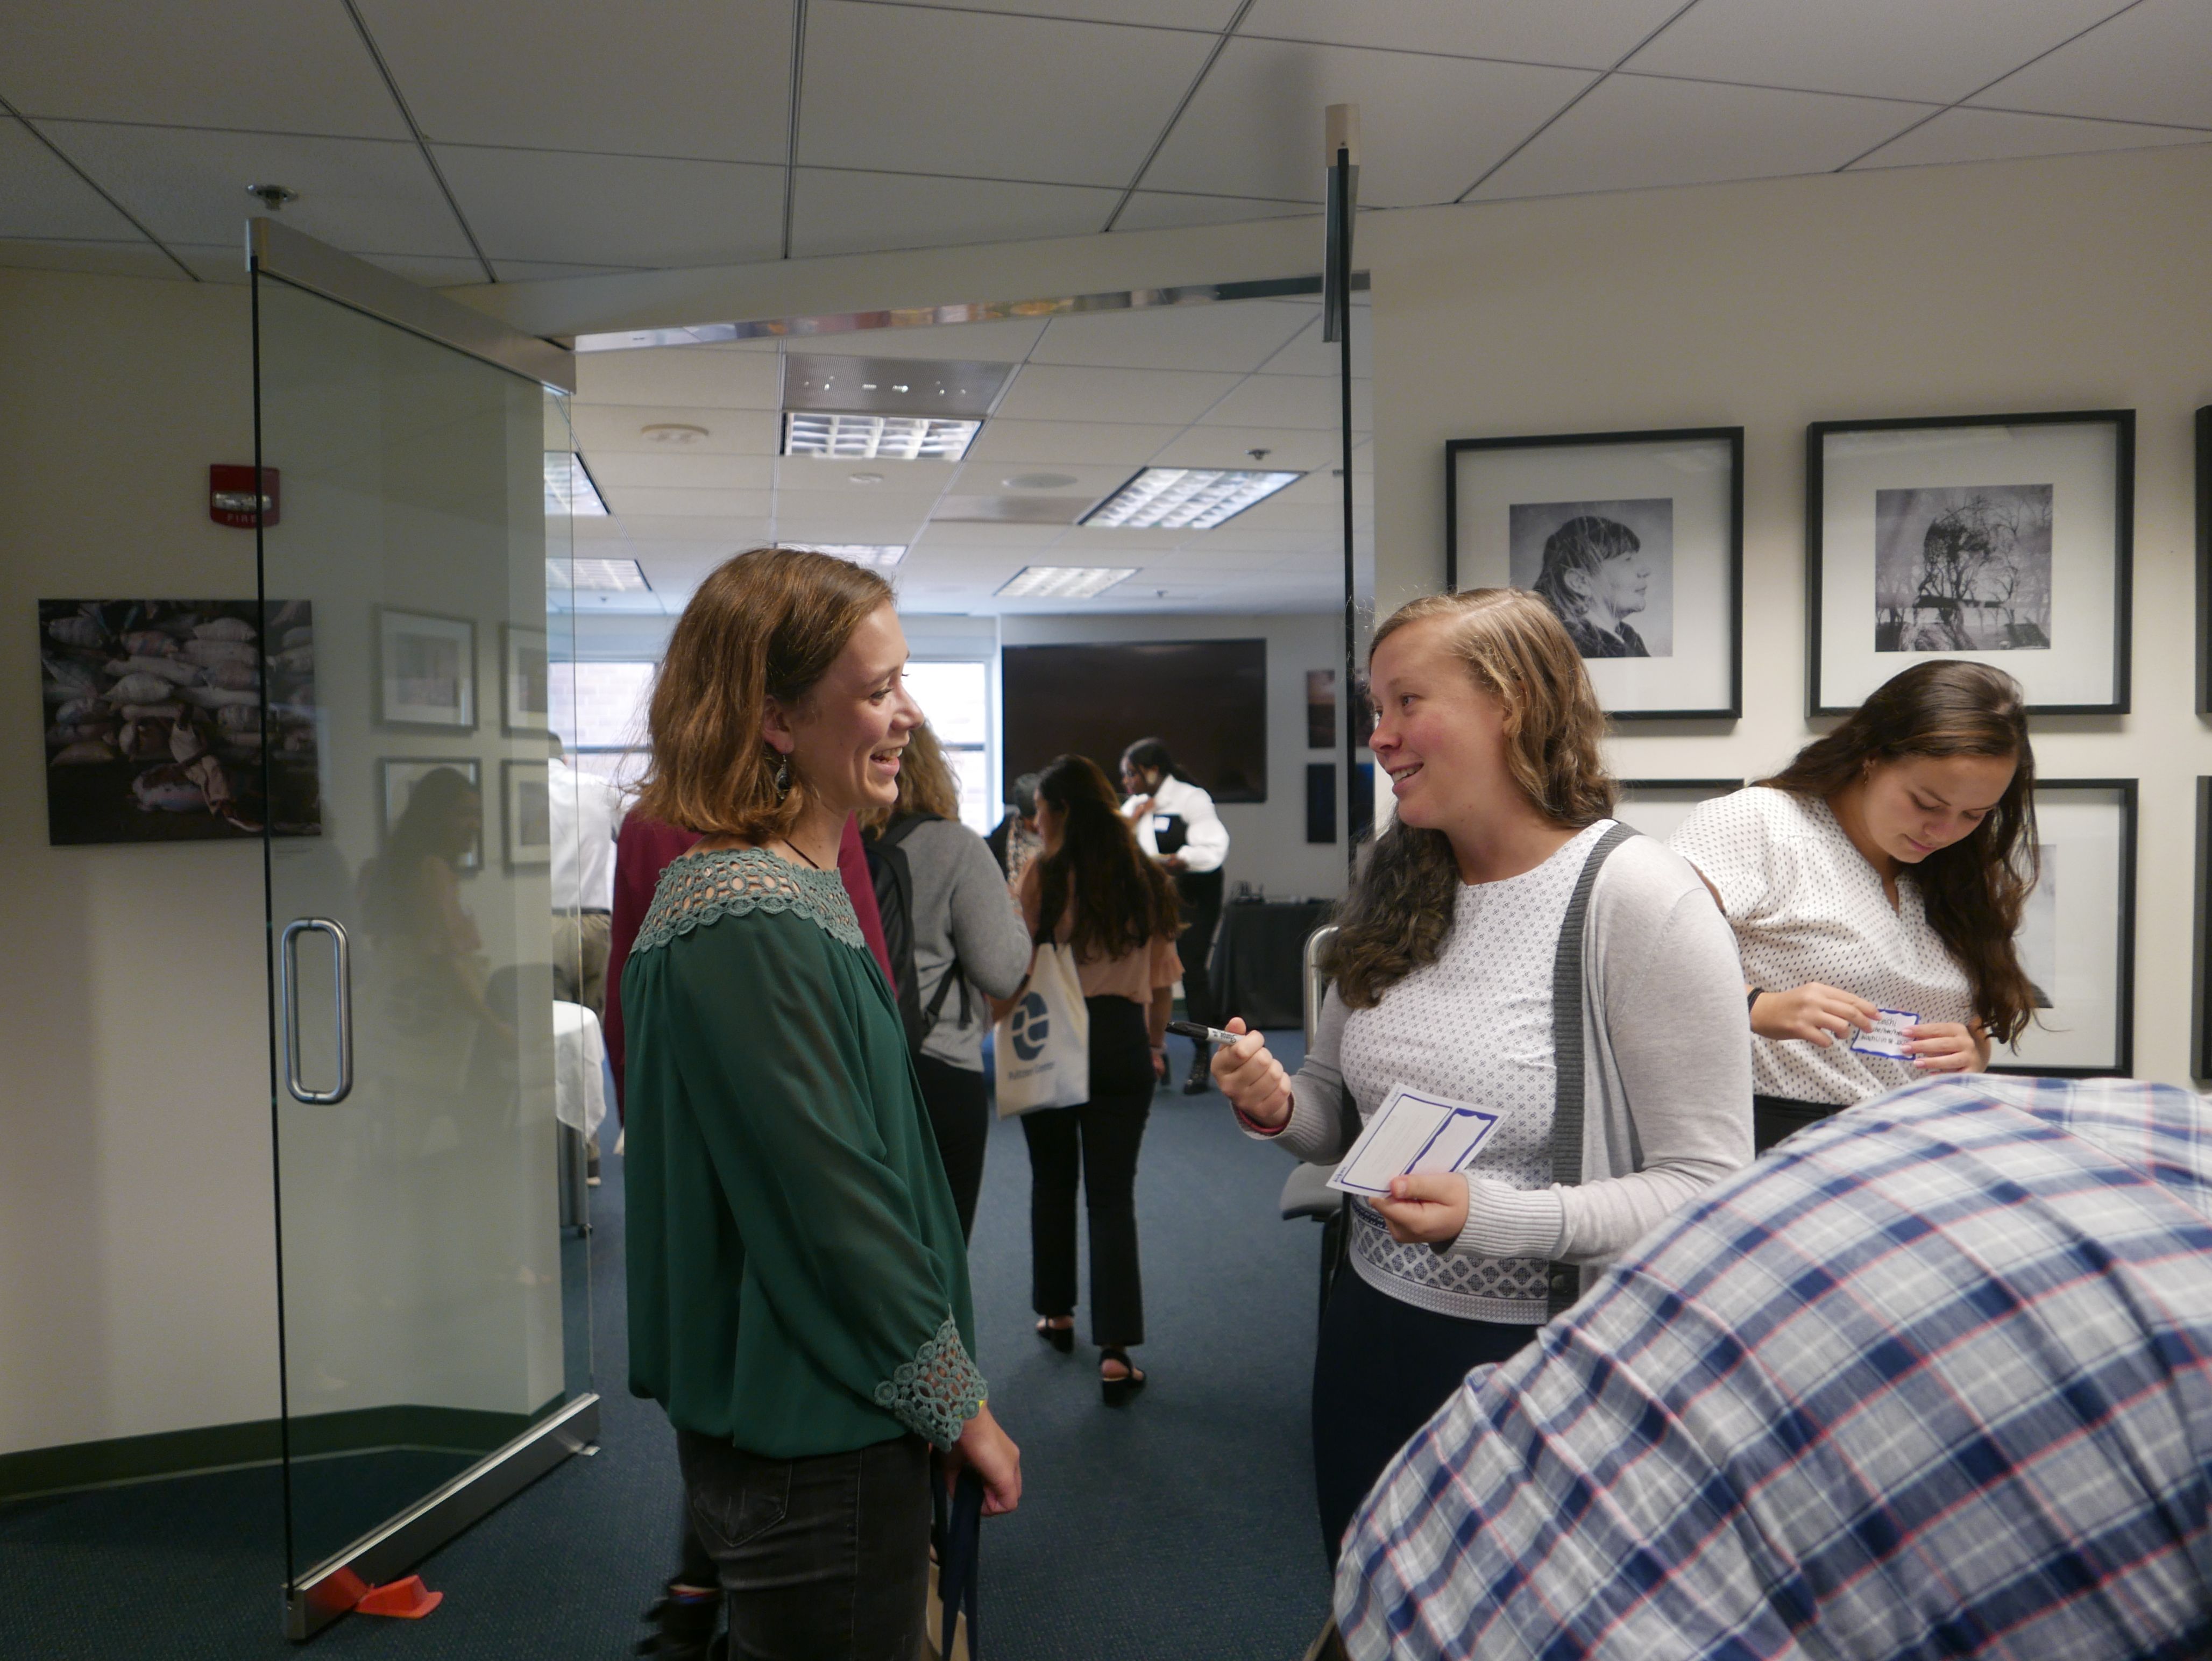 Catherine Cartier from Davidson College, Emma Johnson from Yale School of Forestry, and Keishi Foecke from Washington University, at the Pulitzer Center. Image by Meerabelle Jesuthasan. United States, 2019.